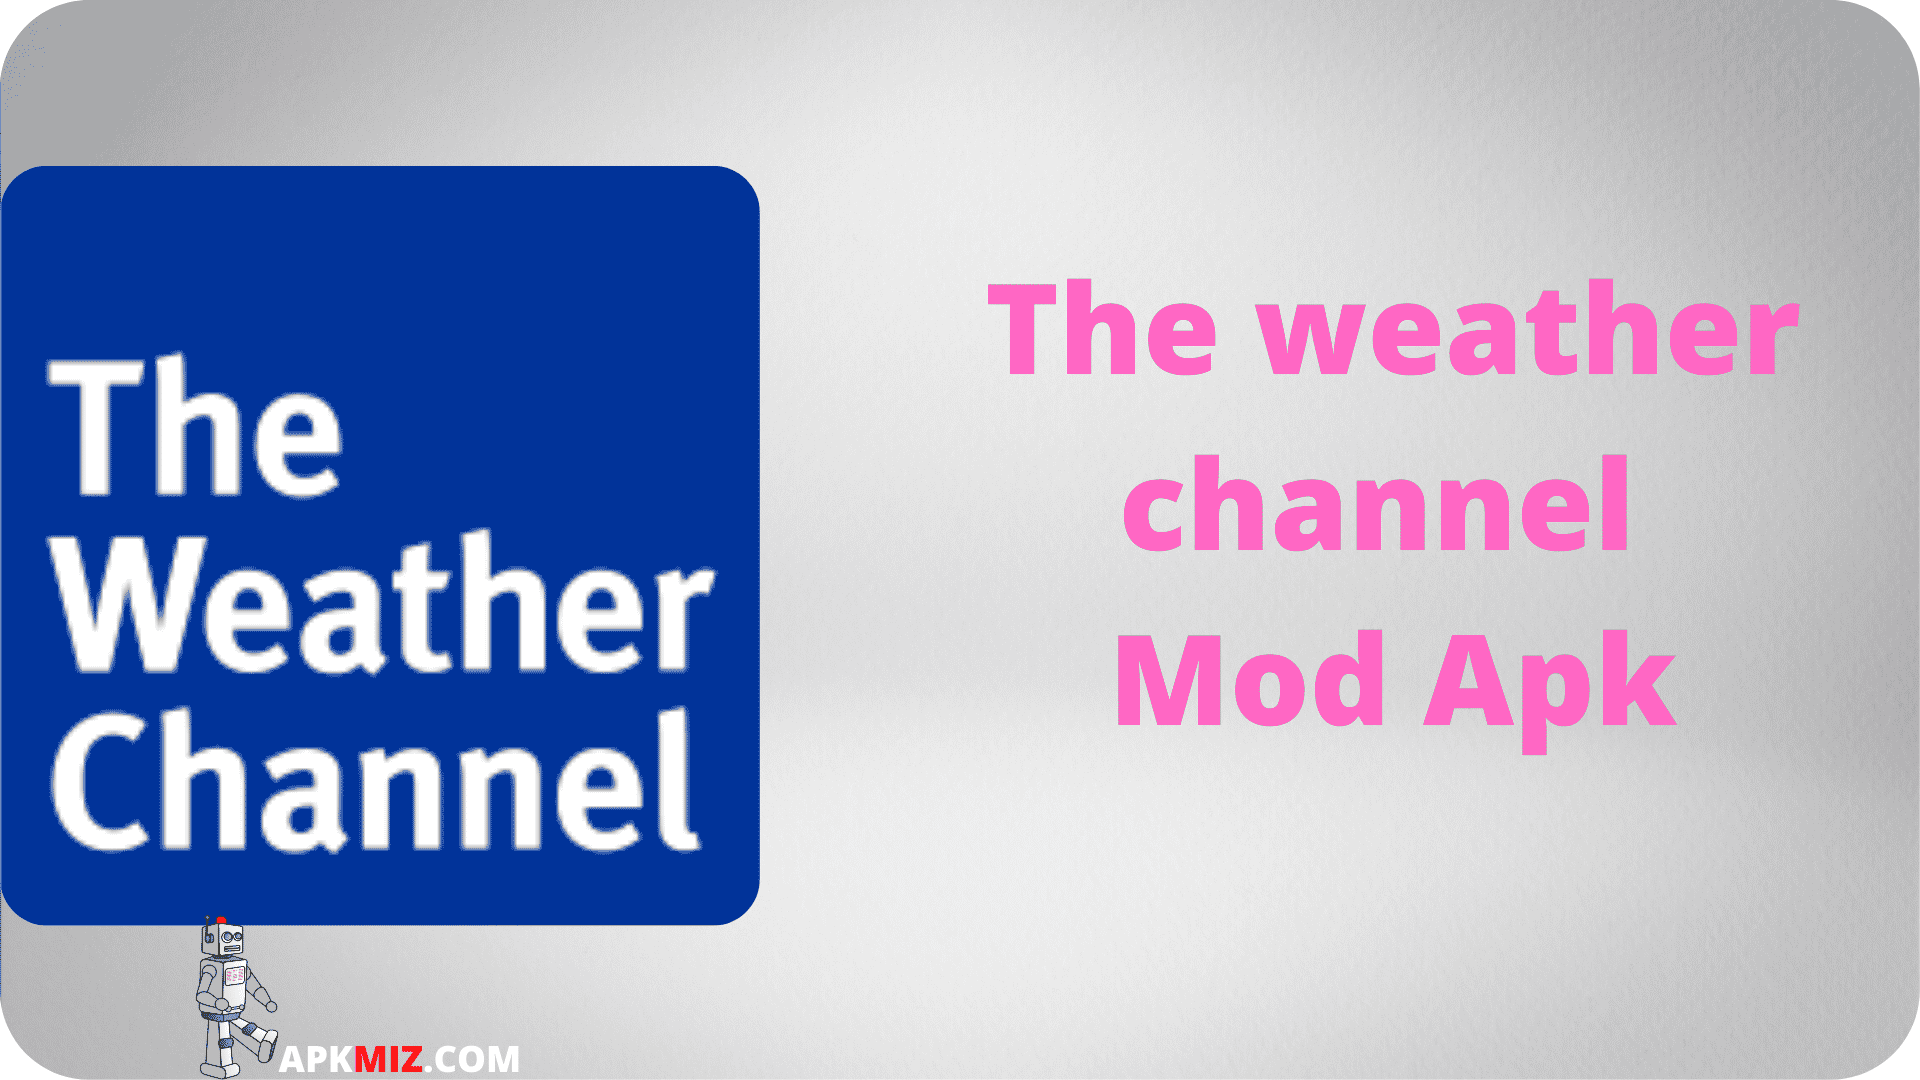 The weather channel Mod Apk